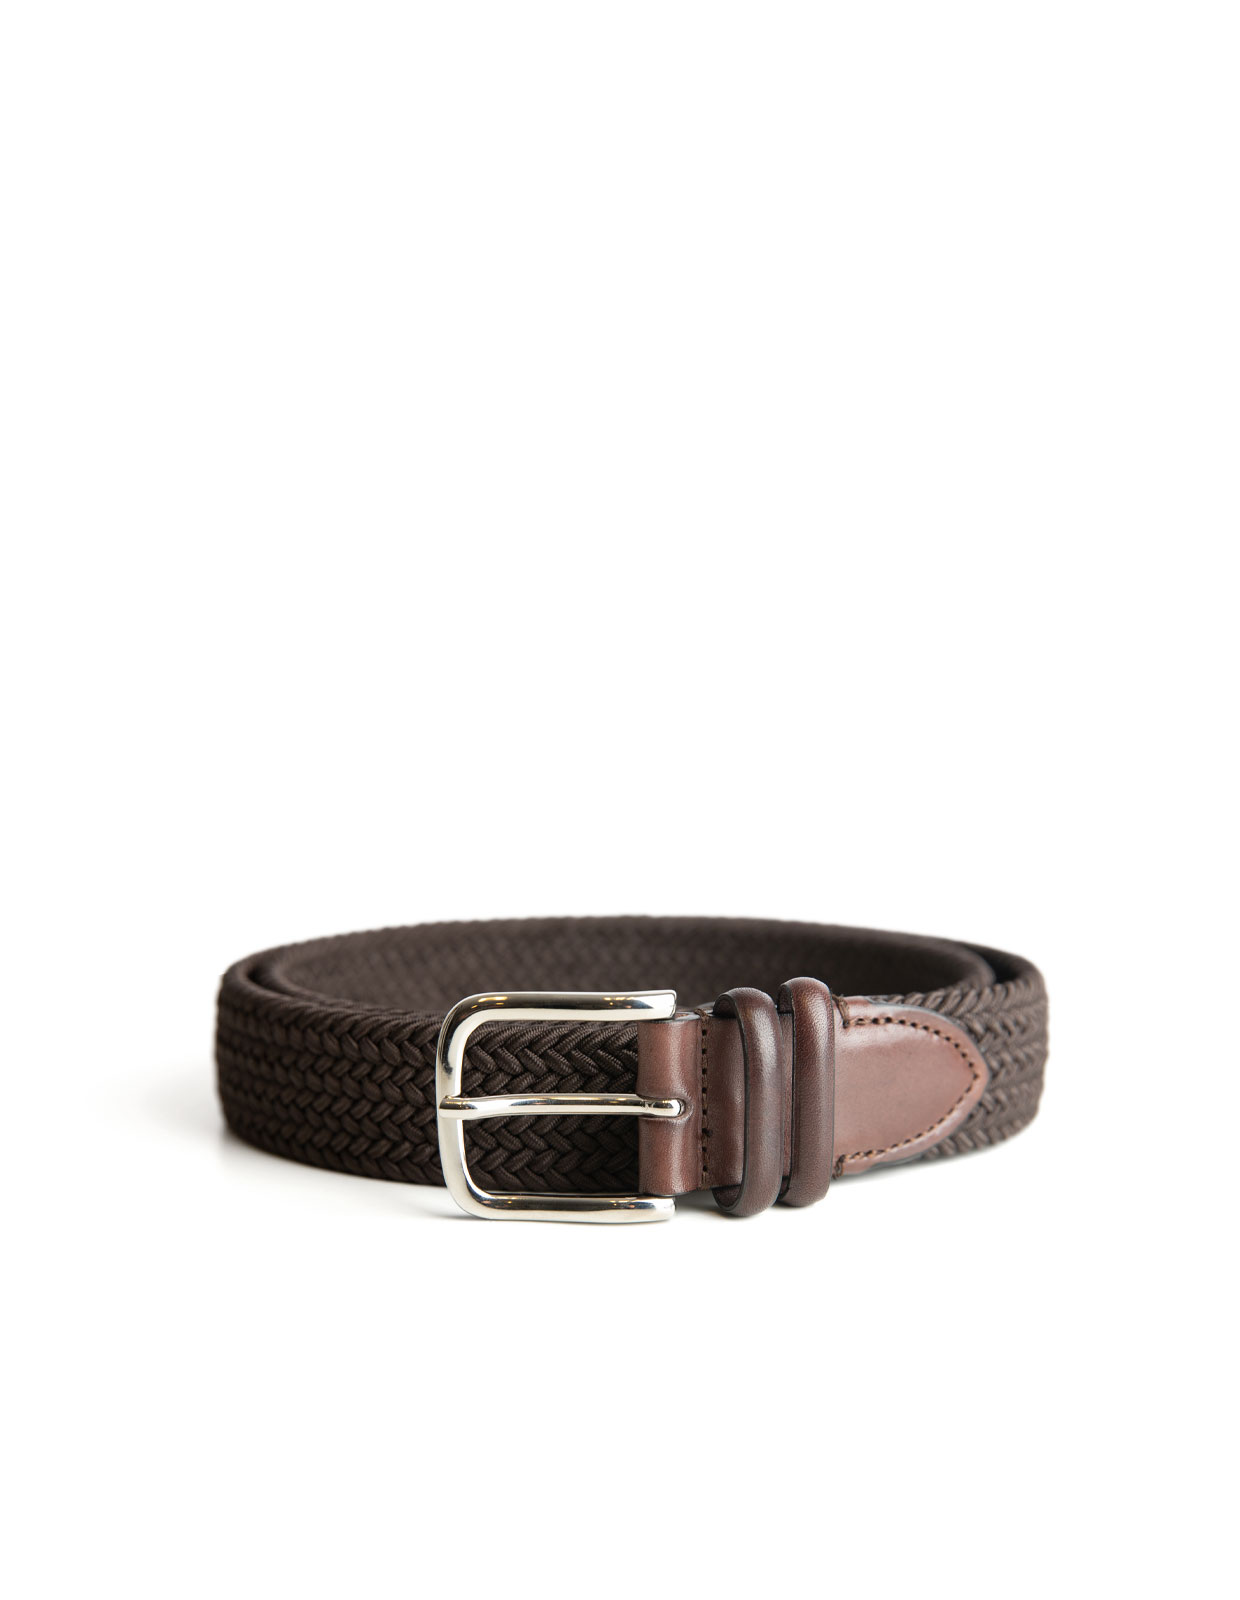 Woven Stretched Rayon Belt Dark Brown Stl 100